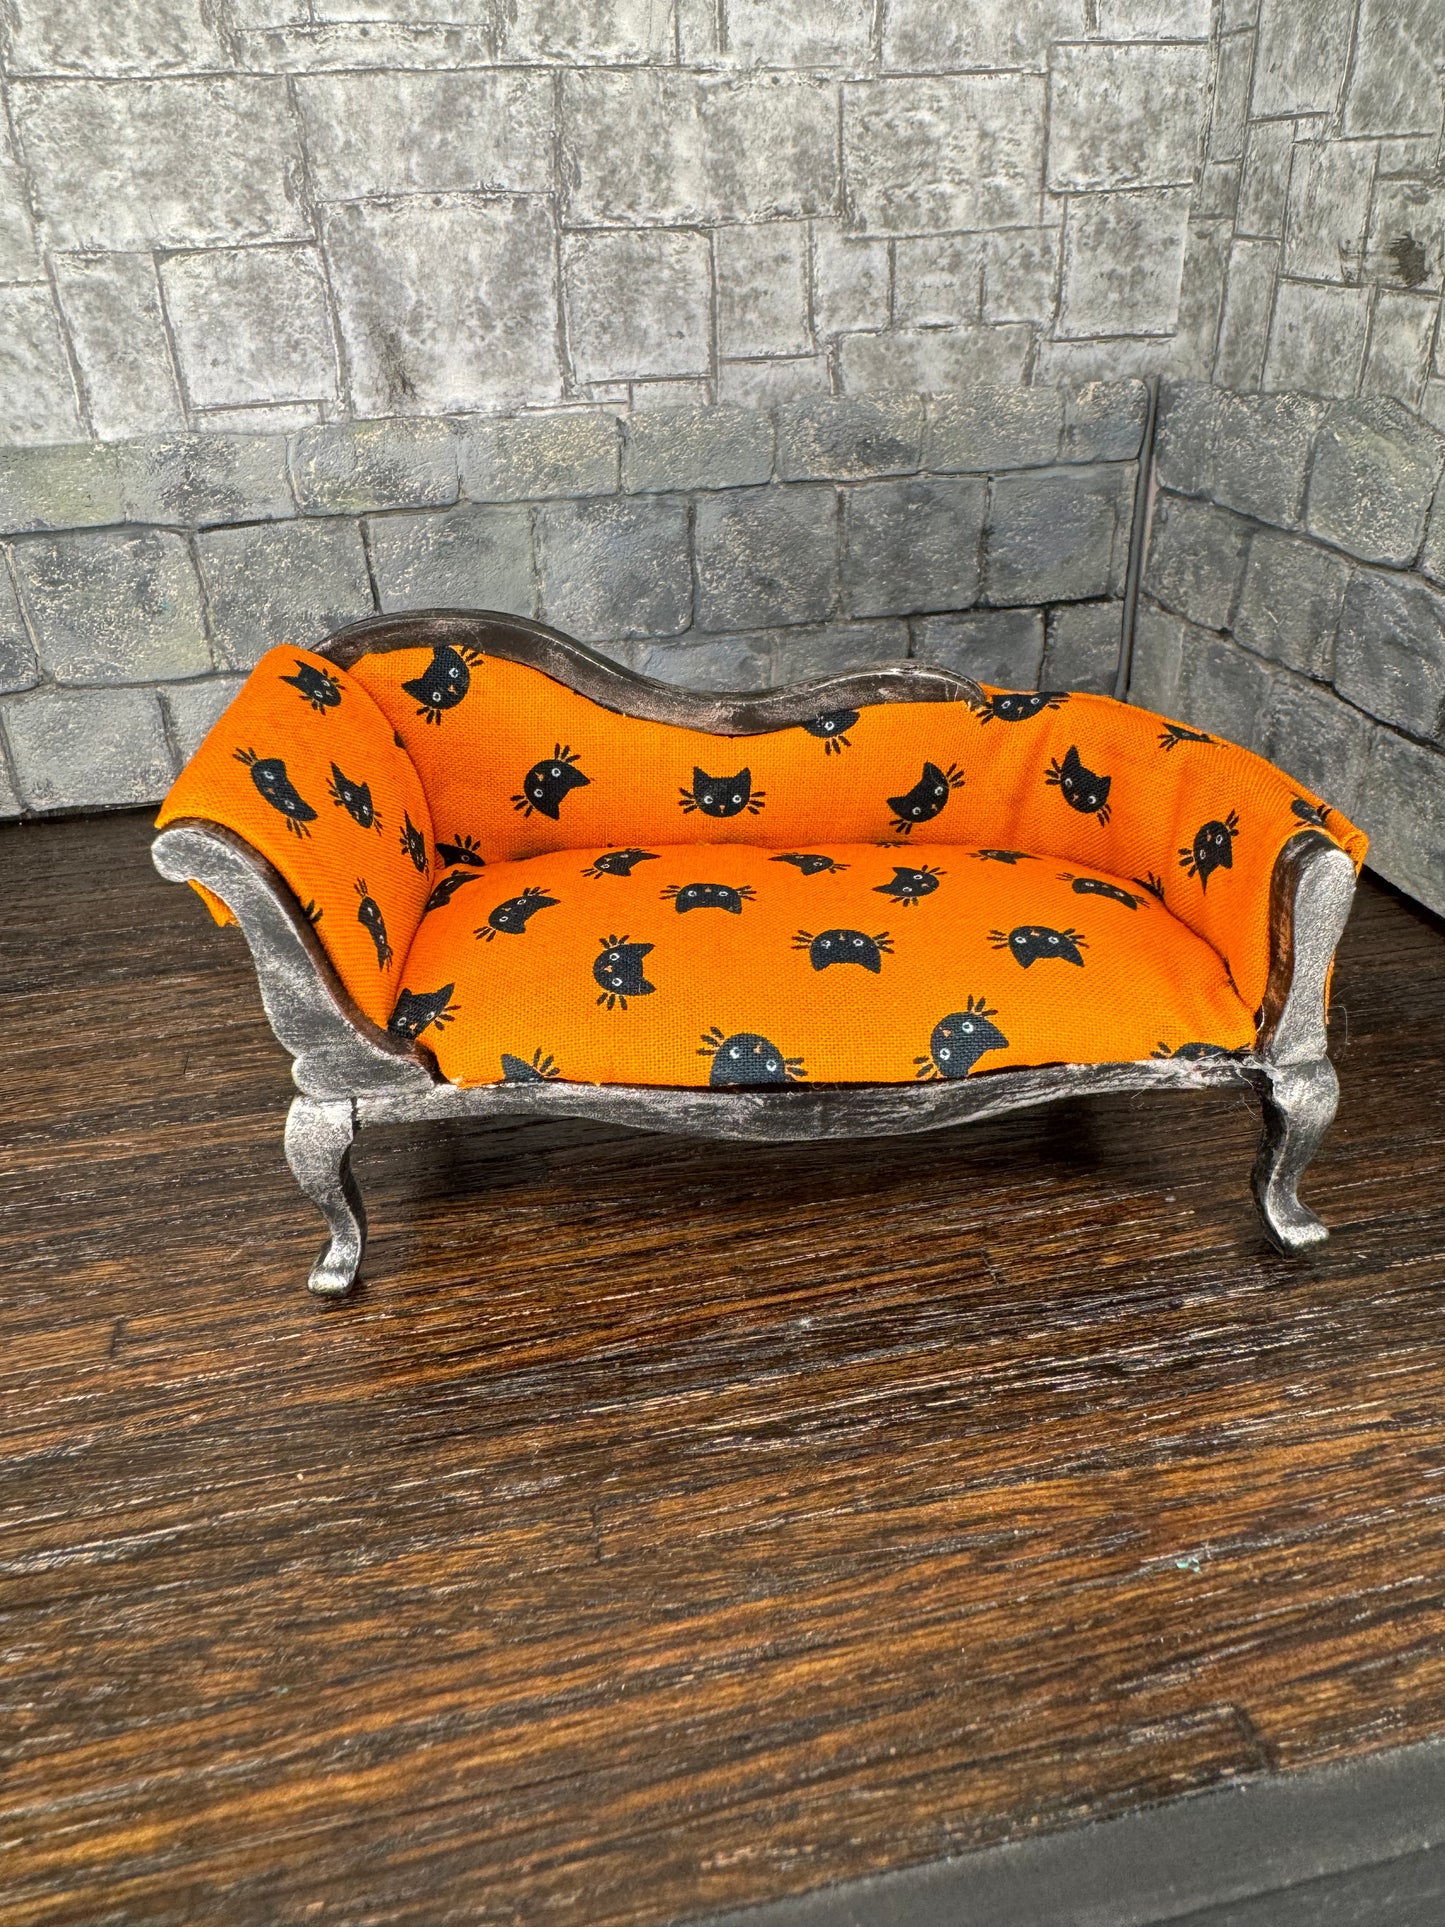 Vintage Black Cats on Orange Fainting Couch - 1:12 Scale